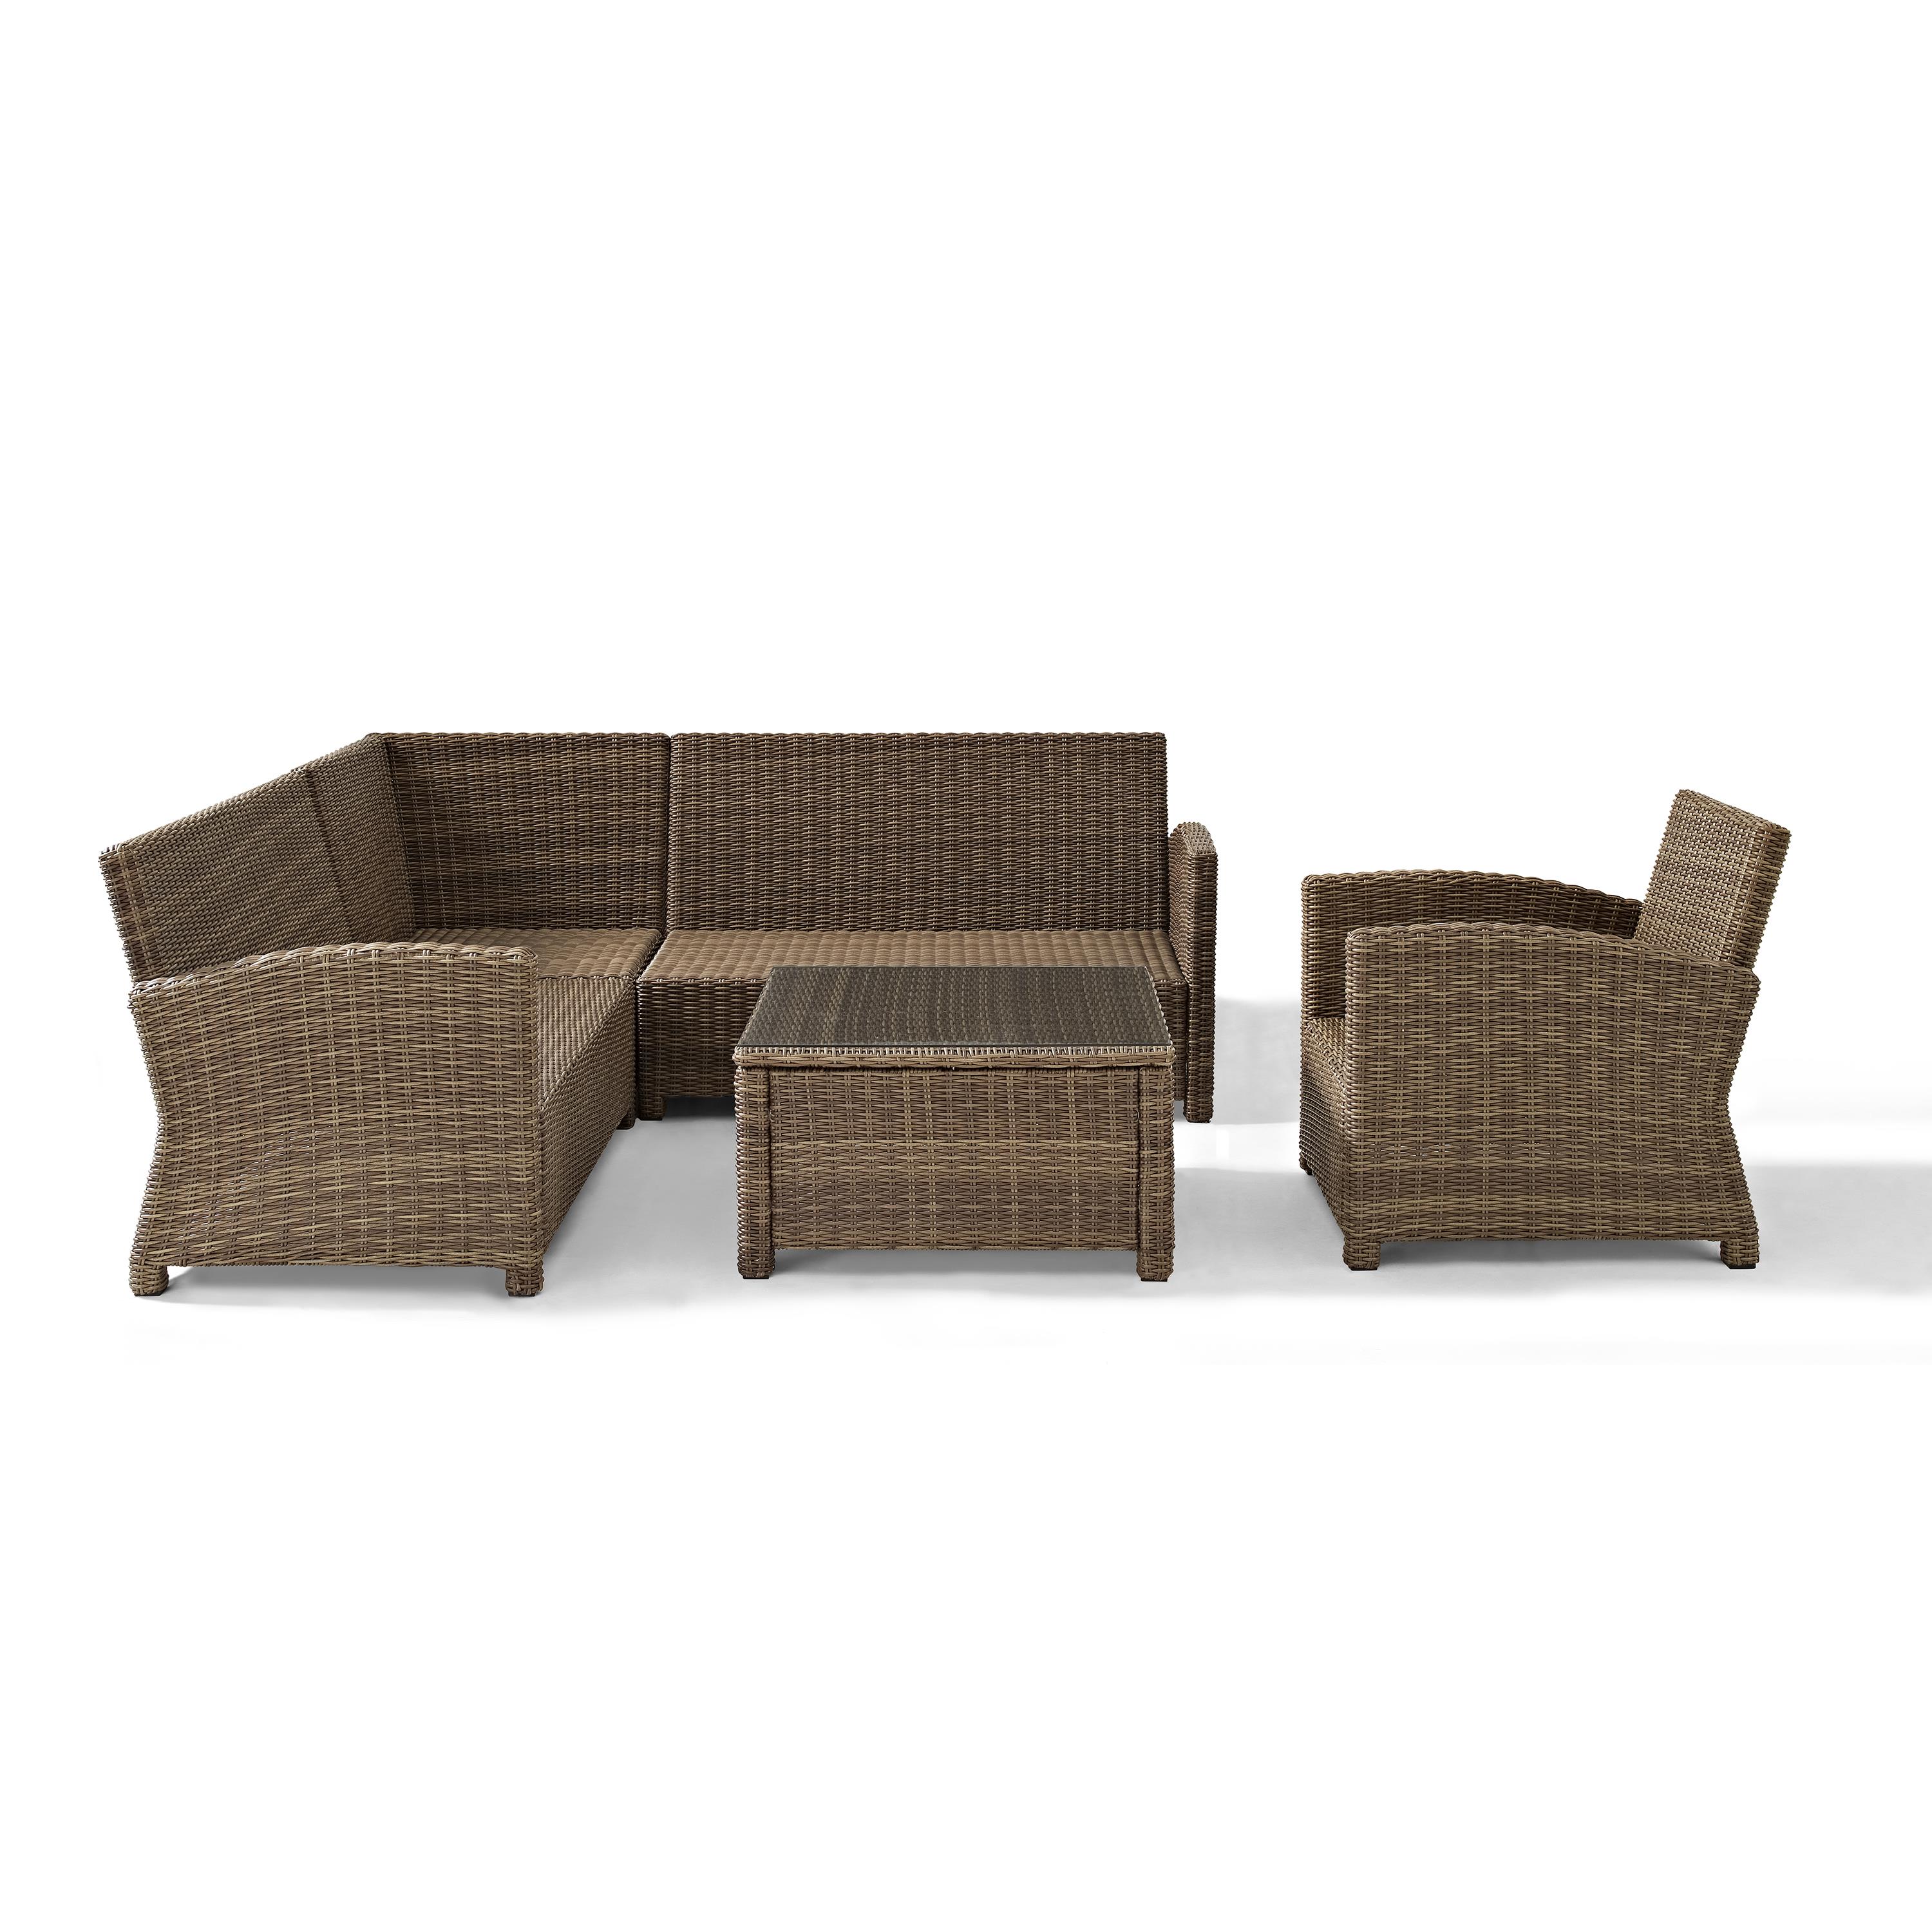 Crosley Furniture Bradenton 5 Pc Fabric Patio Sectional Set in Brown and Navy - image 3 of 10